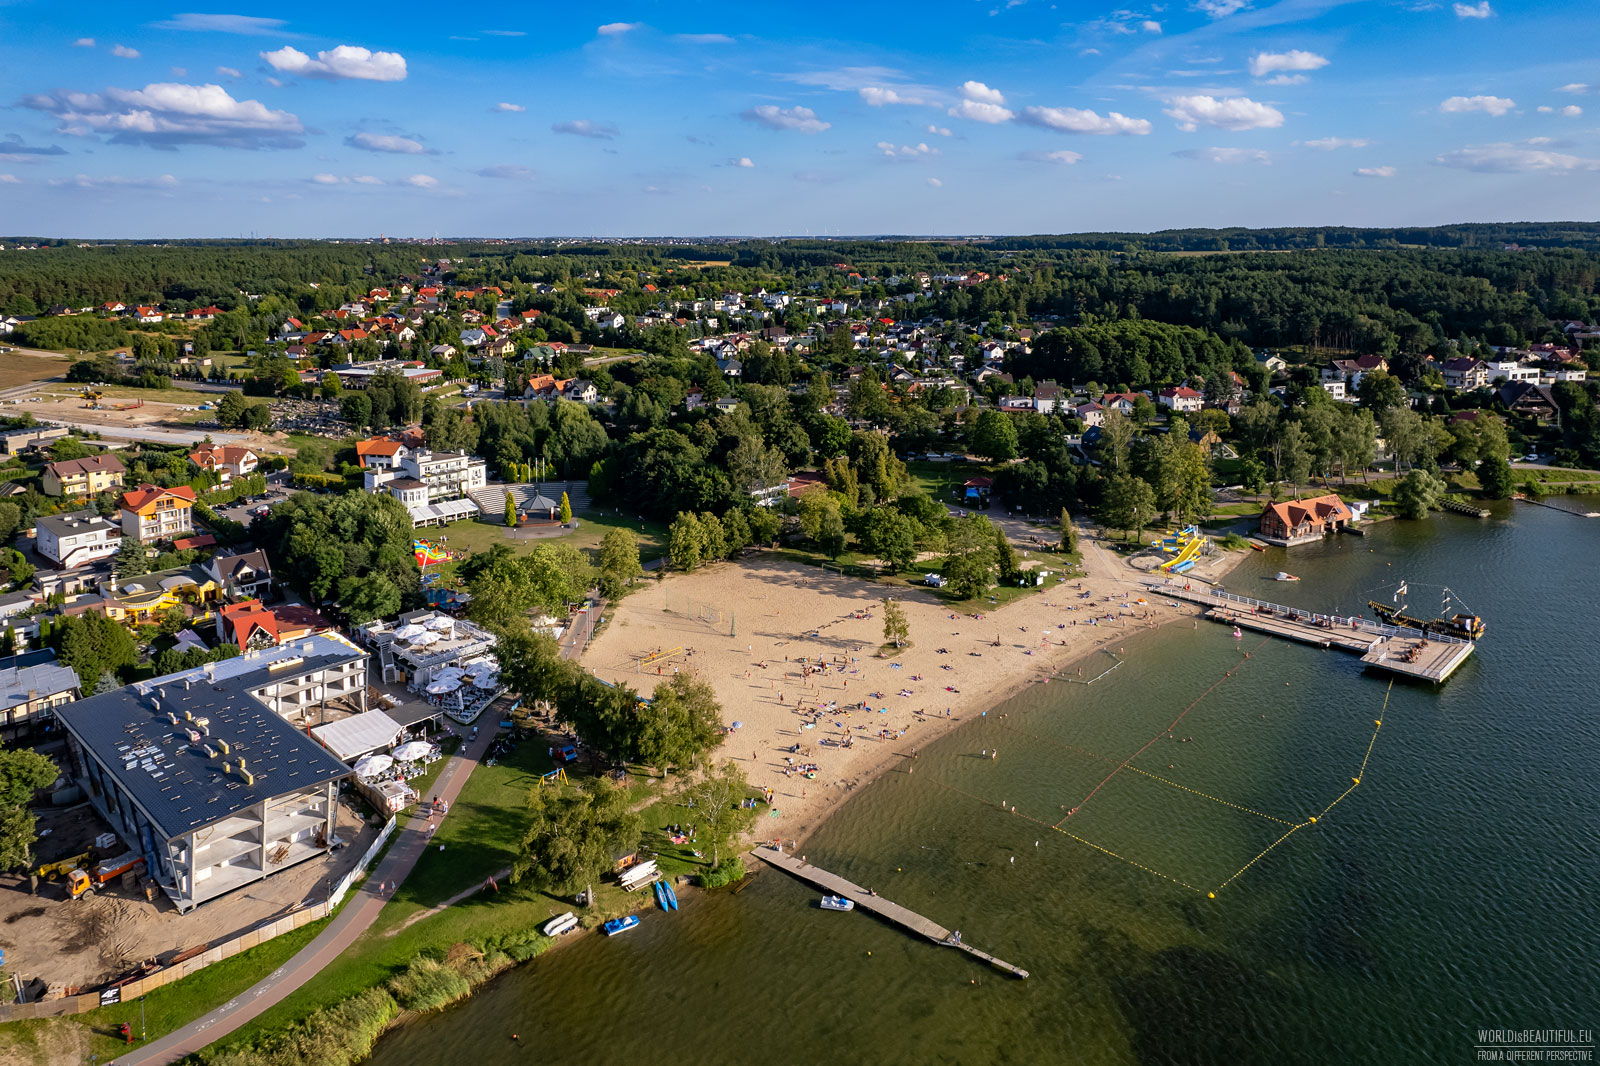 Beach and swimming area, Charzykowy